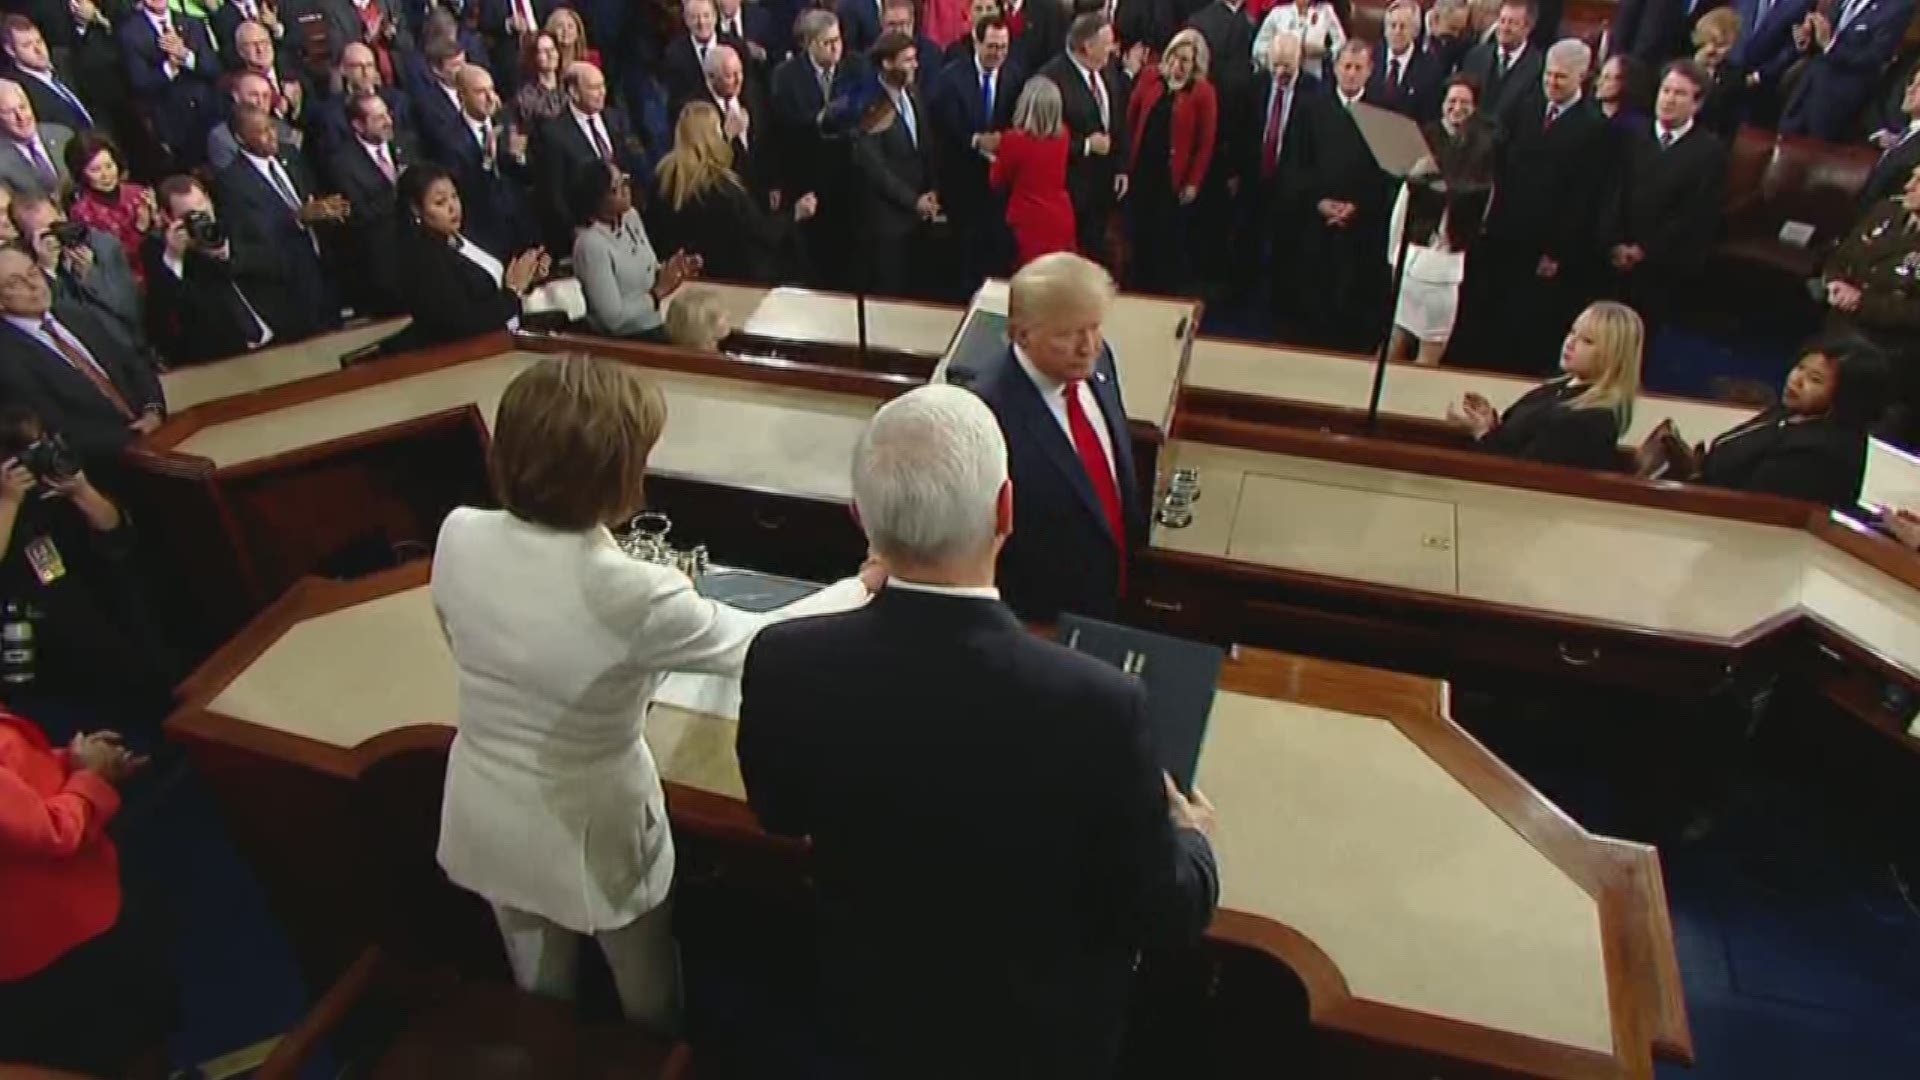 House Speaker Nancy Pelosi shakes off not shaking President Trump's hand before State of the Union address.